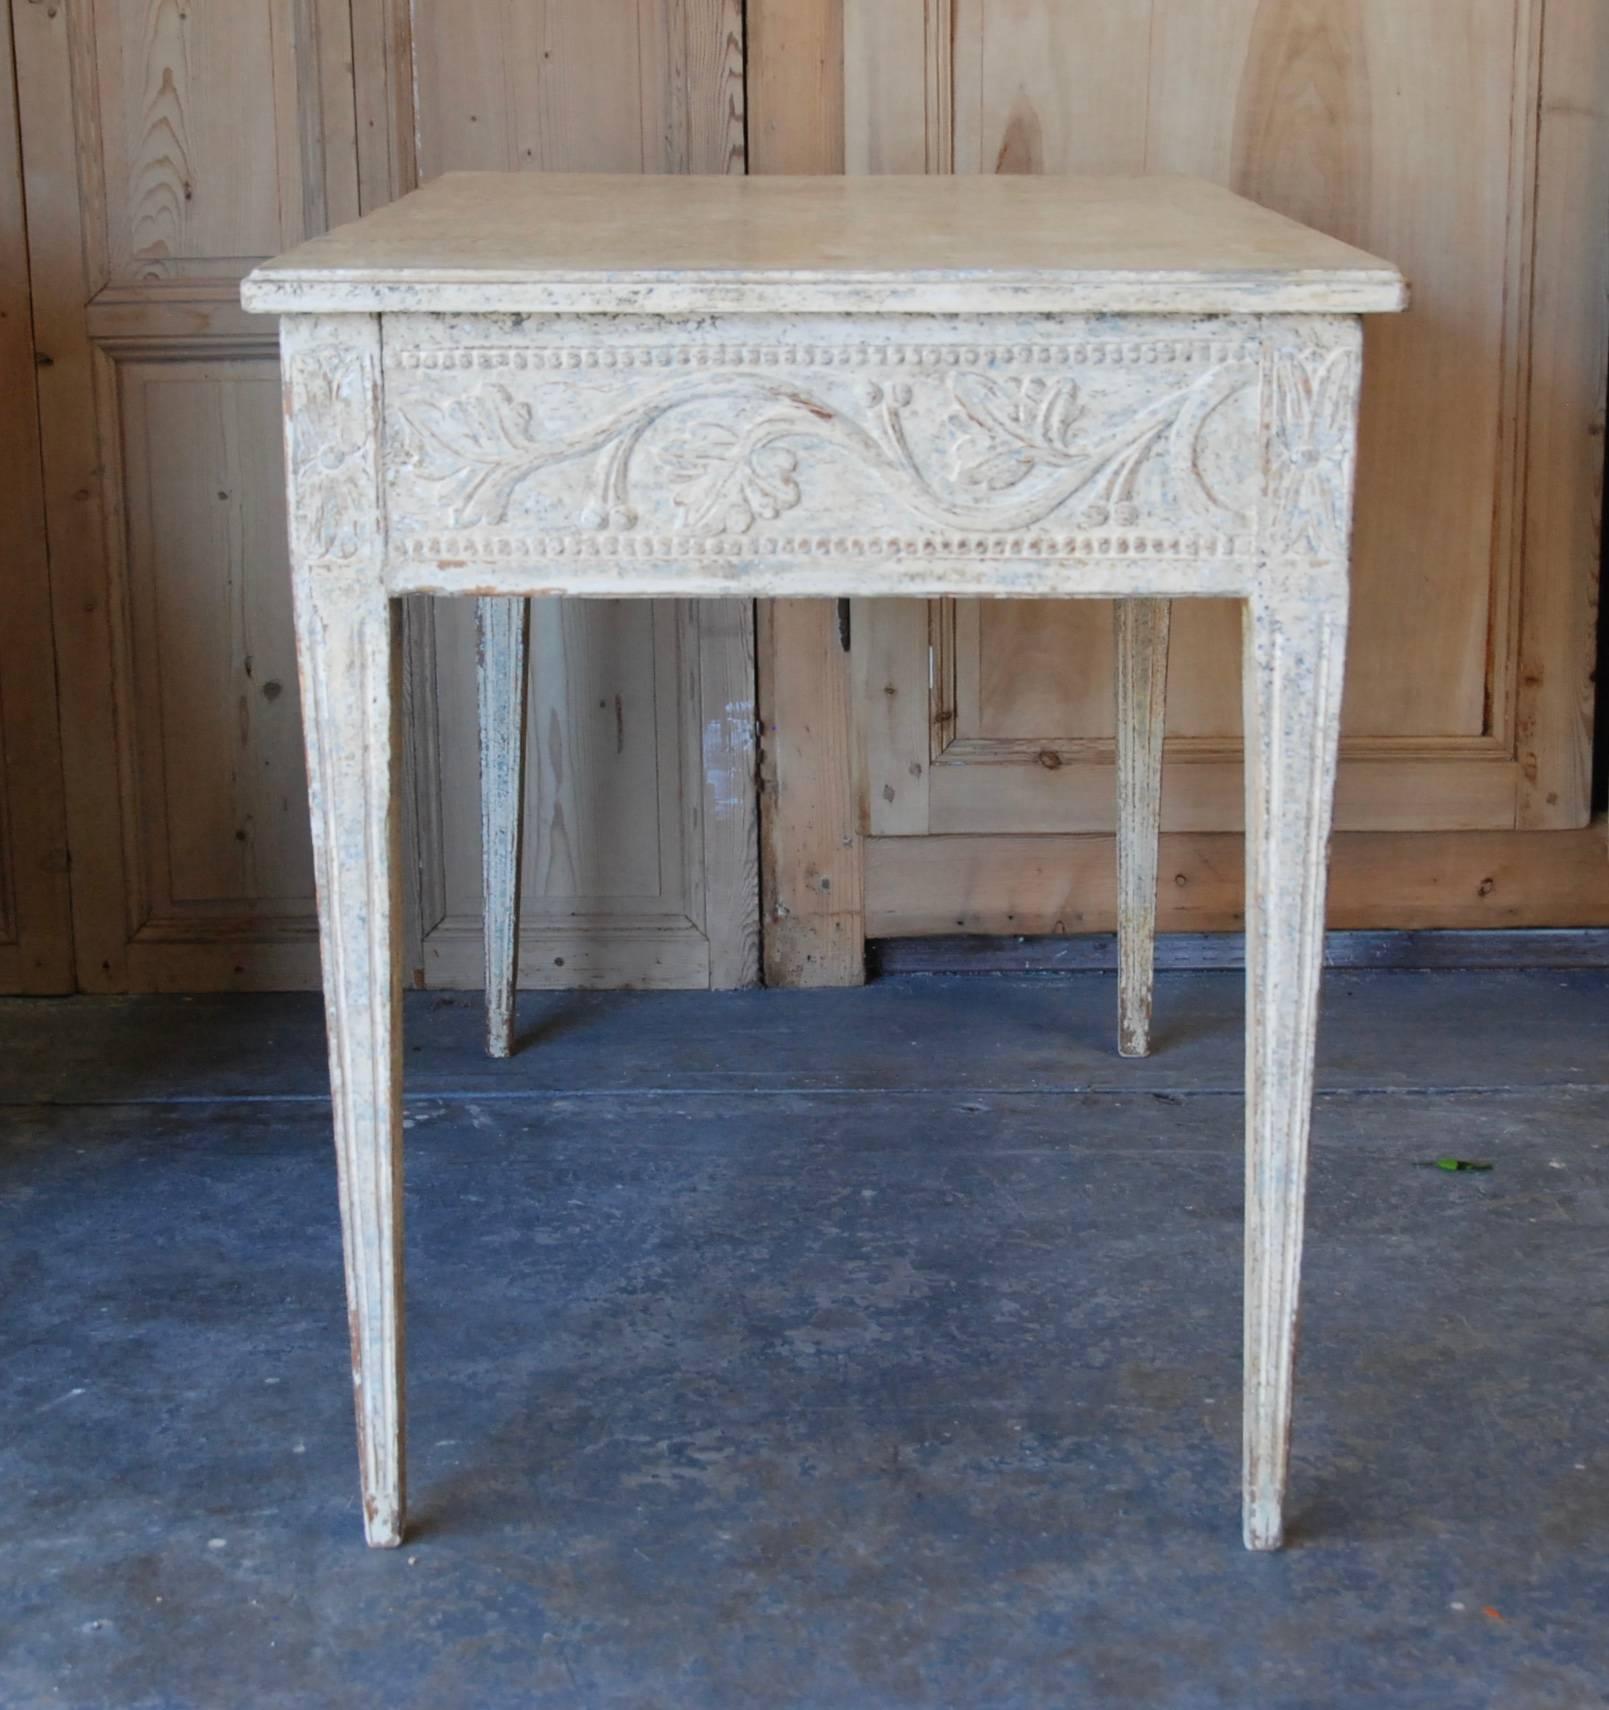 19th century Swedish console table with lovely carved apron and tapered fluted legs. The beautiful carving extends all around the table in a soft Swedish cream or white color.